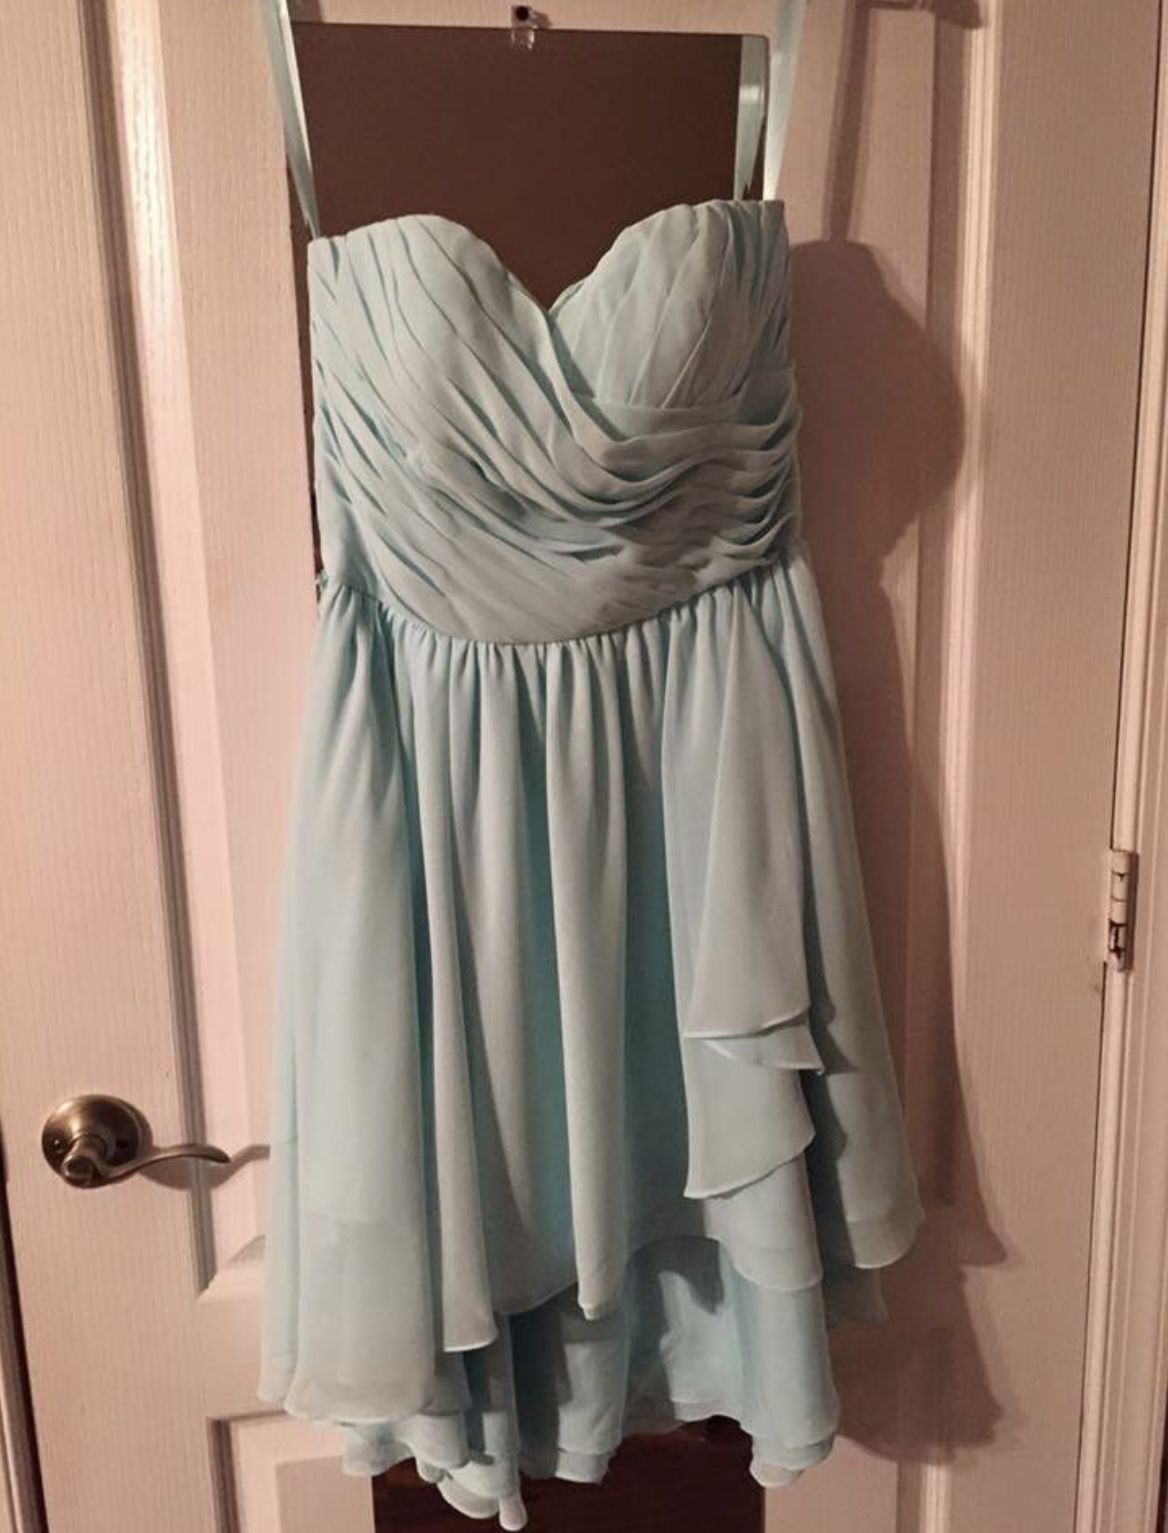 Gorgeous Bridesmaid/Prom/Homecoming Dress. Size 6